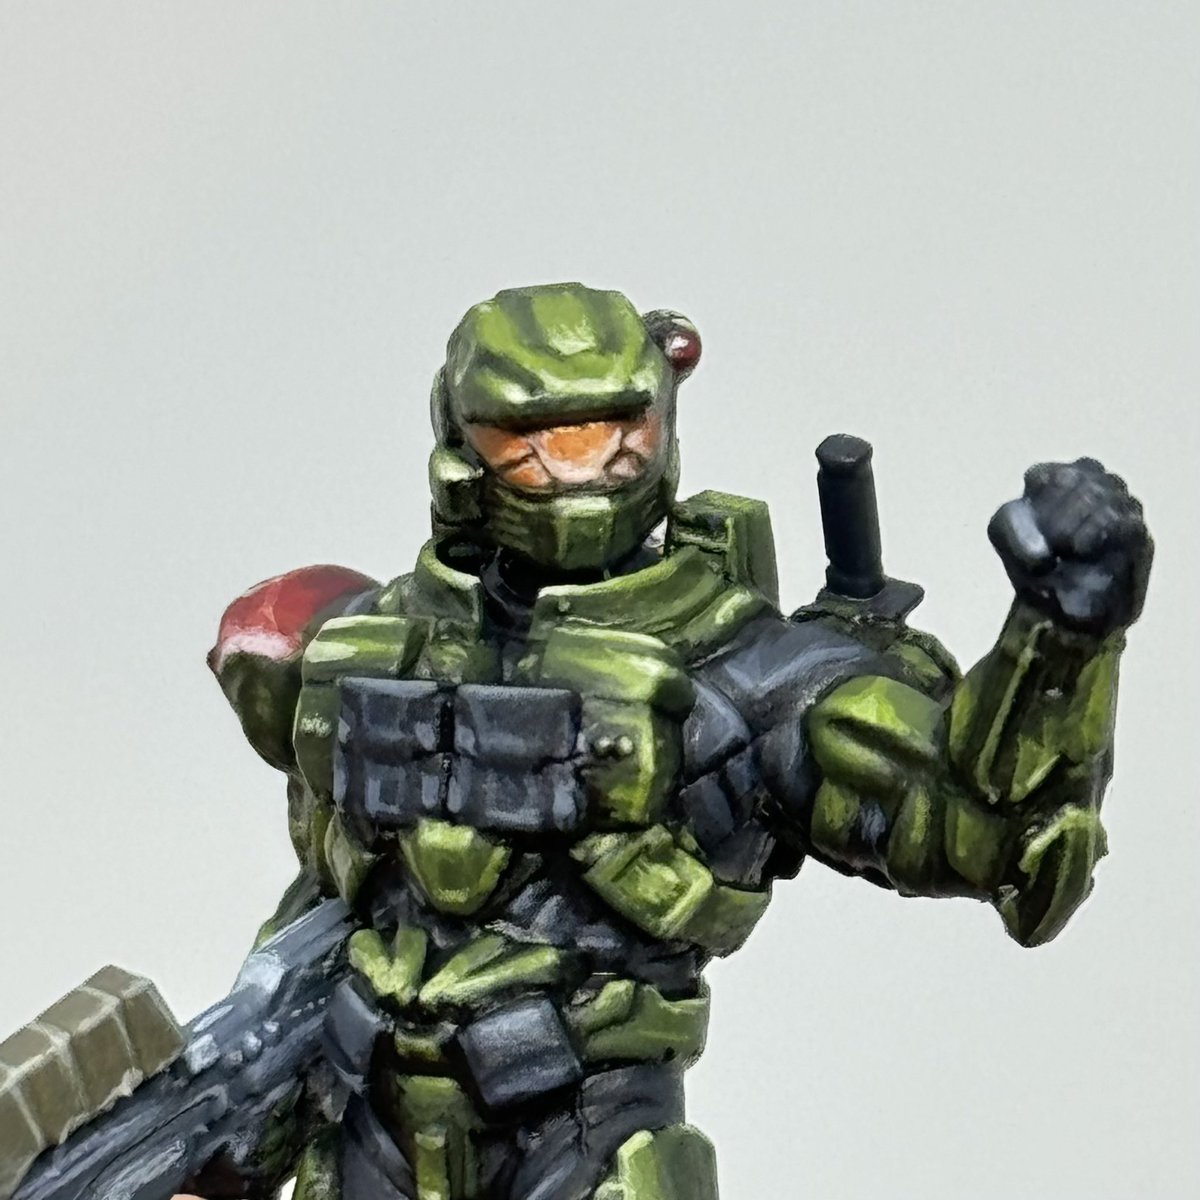 Time to unveil this little guy.
I again reached out to the INCREDIBLE folks at AetherandAlchemist to design my multiplayer Spartan for the tabletop. As always they knocked it out of the park!

#halo #fanart #haloflashpoint #miniaturepainting #haloinfinite #halospotlight